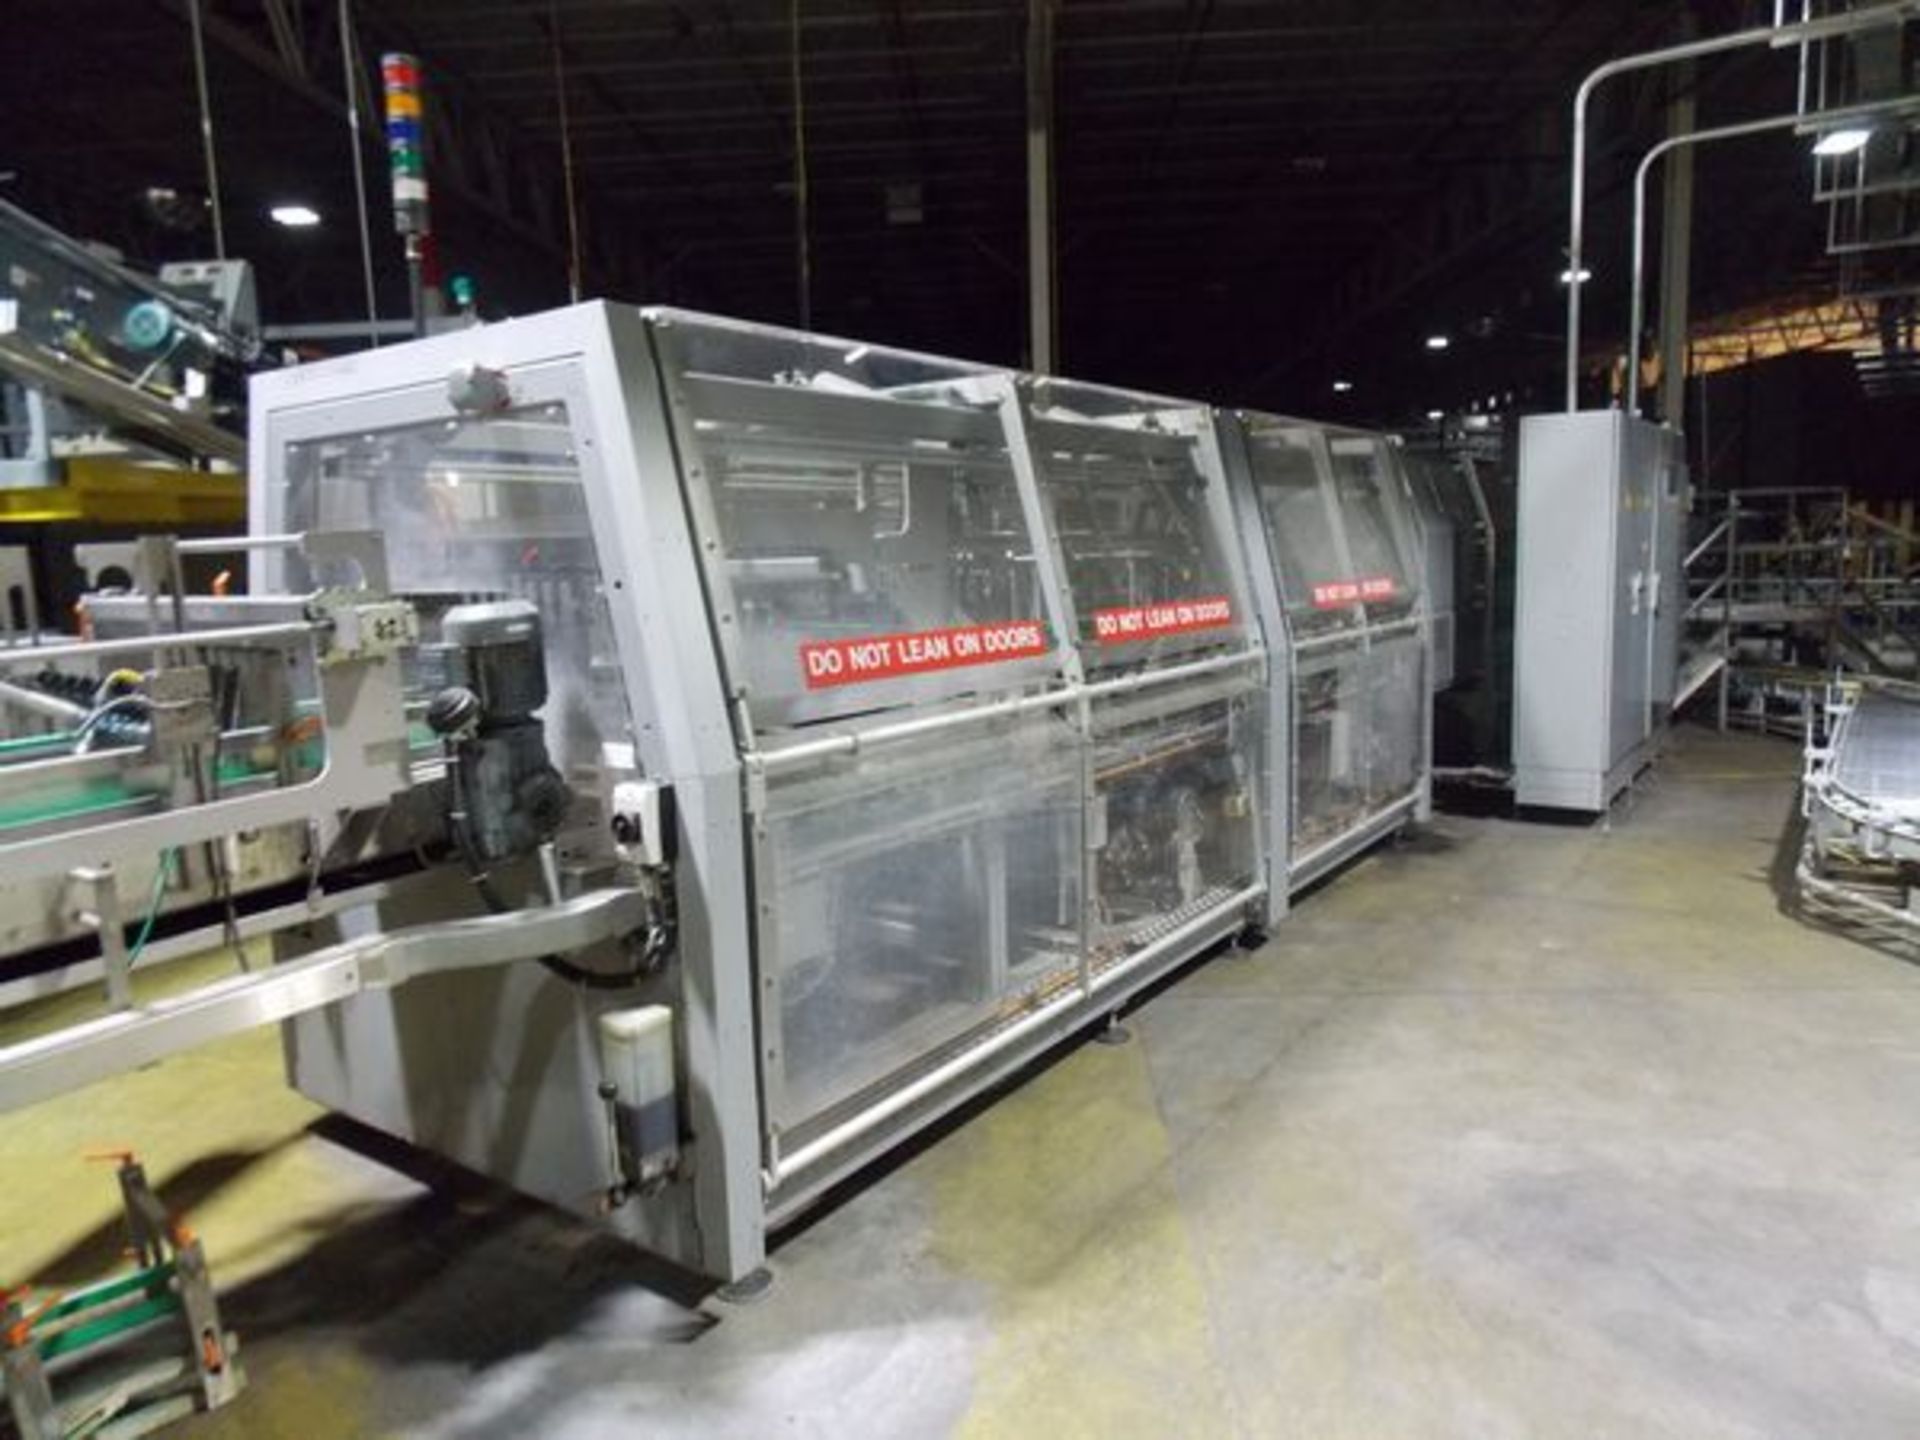 Kisters KHS SP040 Shrink Wrapper Bundler Serial: 2443 Year: 2003 Uses Film Only - NO Tray, Last - Image 2 of 4